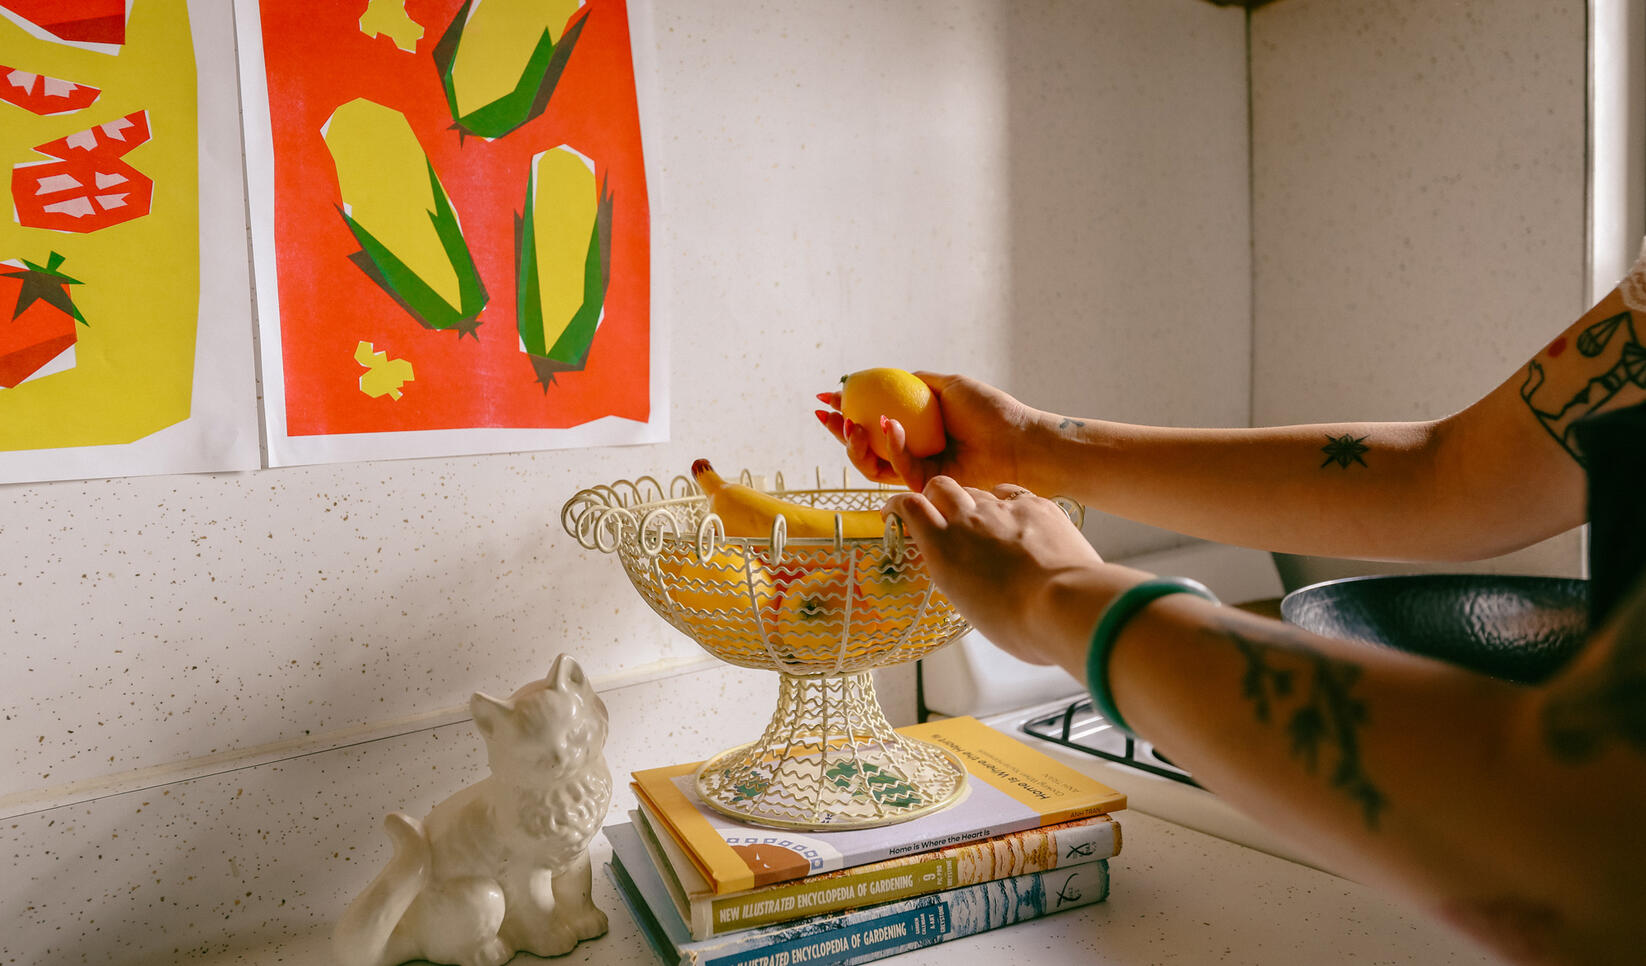 Student grabbing fruit out of a bowl on the kitchen counter